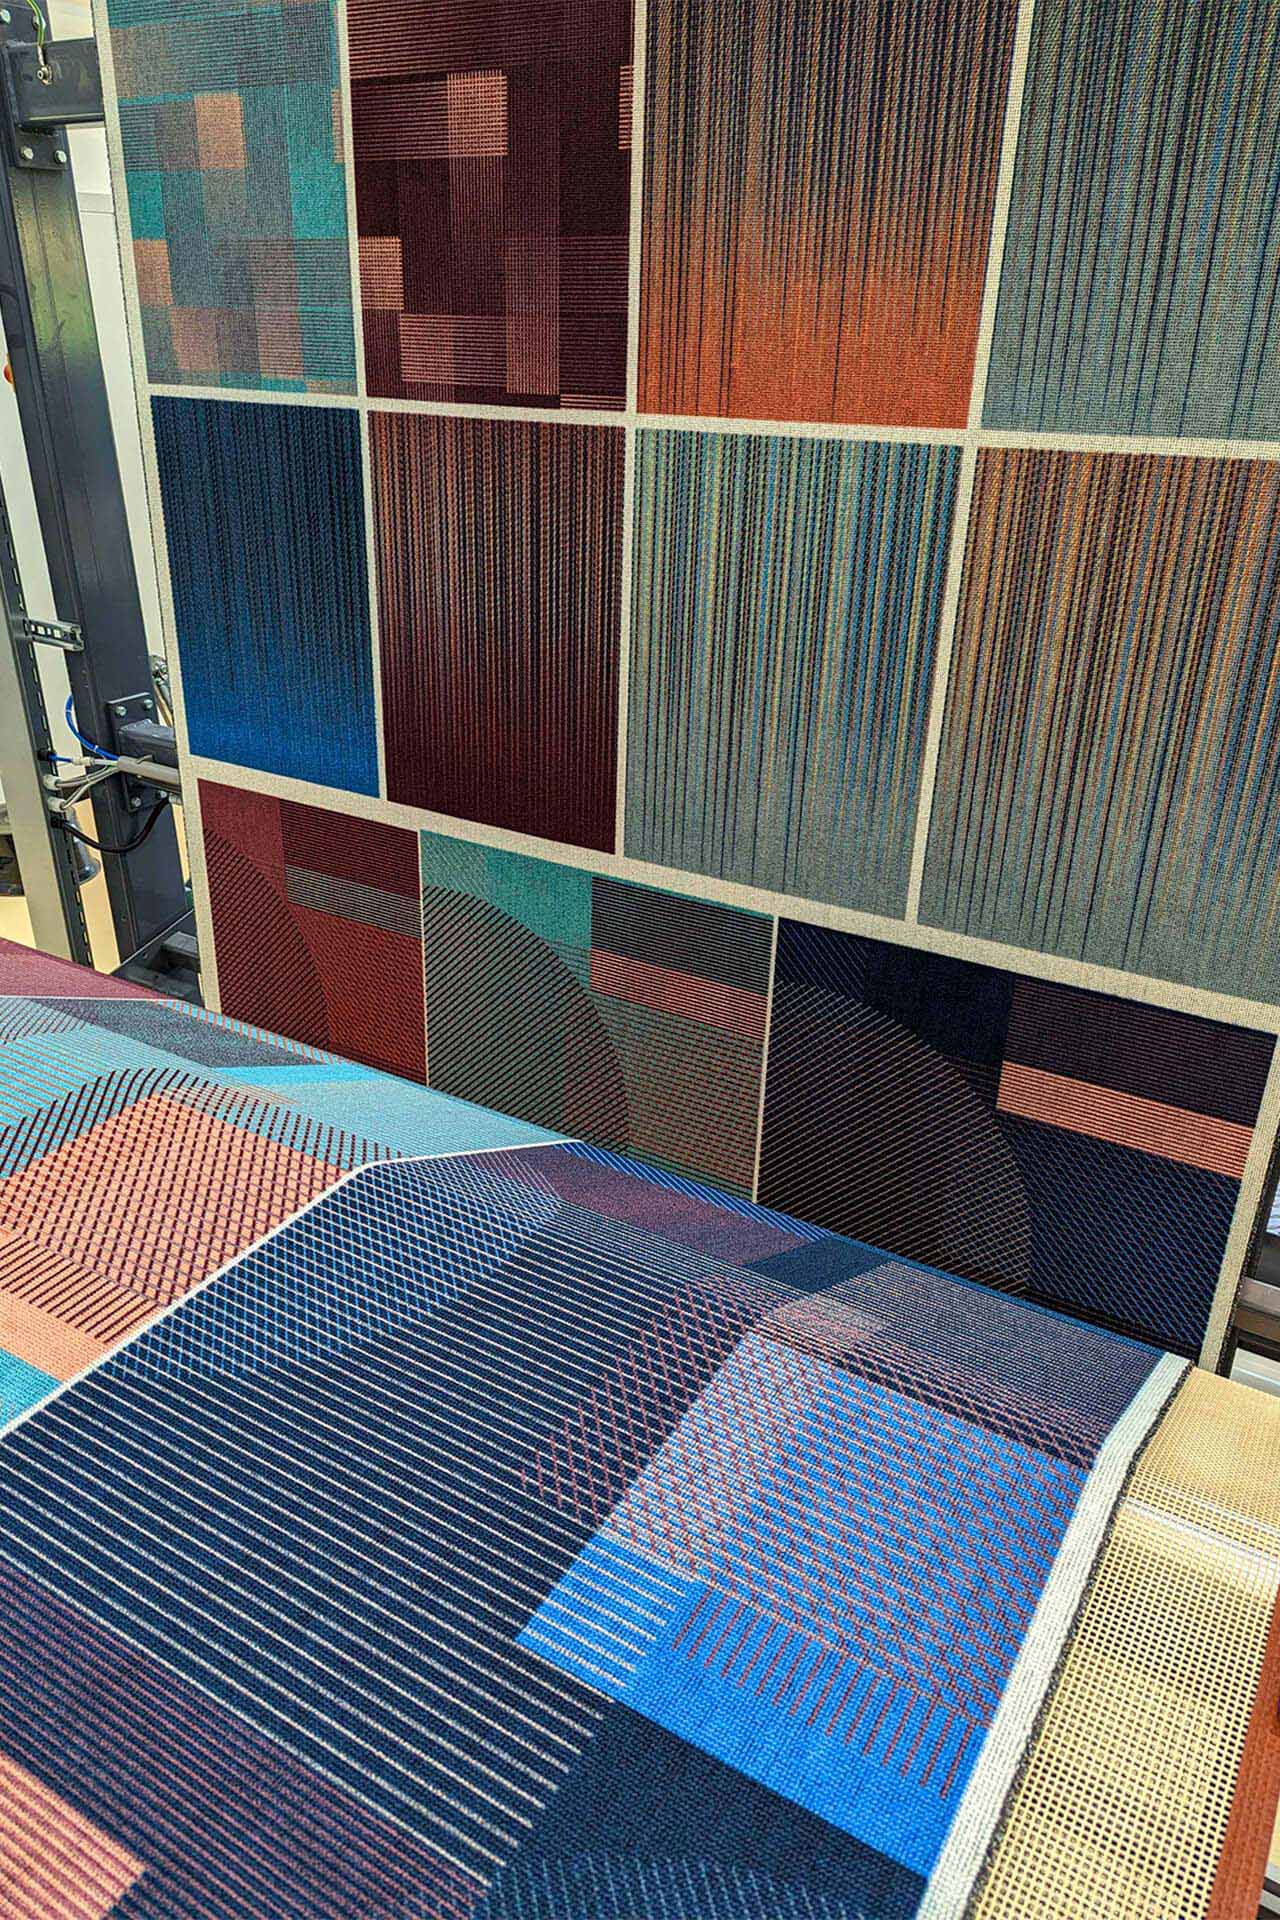 Carpet during the printing process